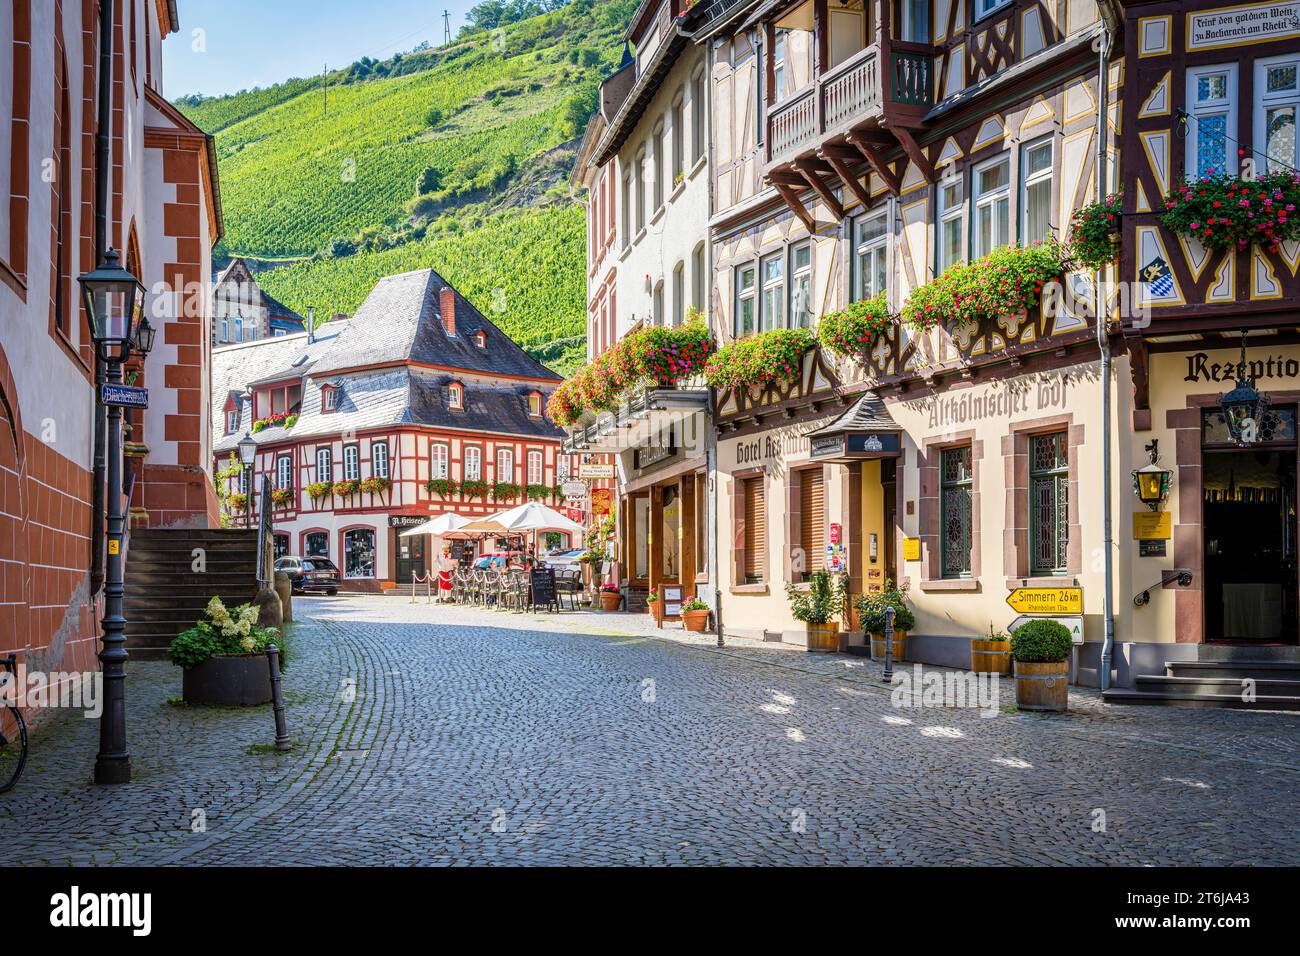 Town of Bacharach on the Middle Rhine, road to Steeg, lined with historic half-timbered houses, street cafes and hotels Stock Photo